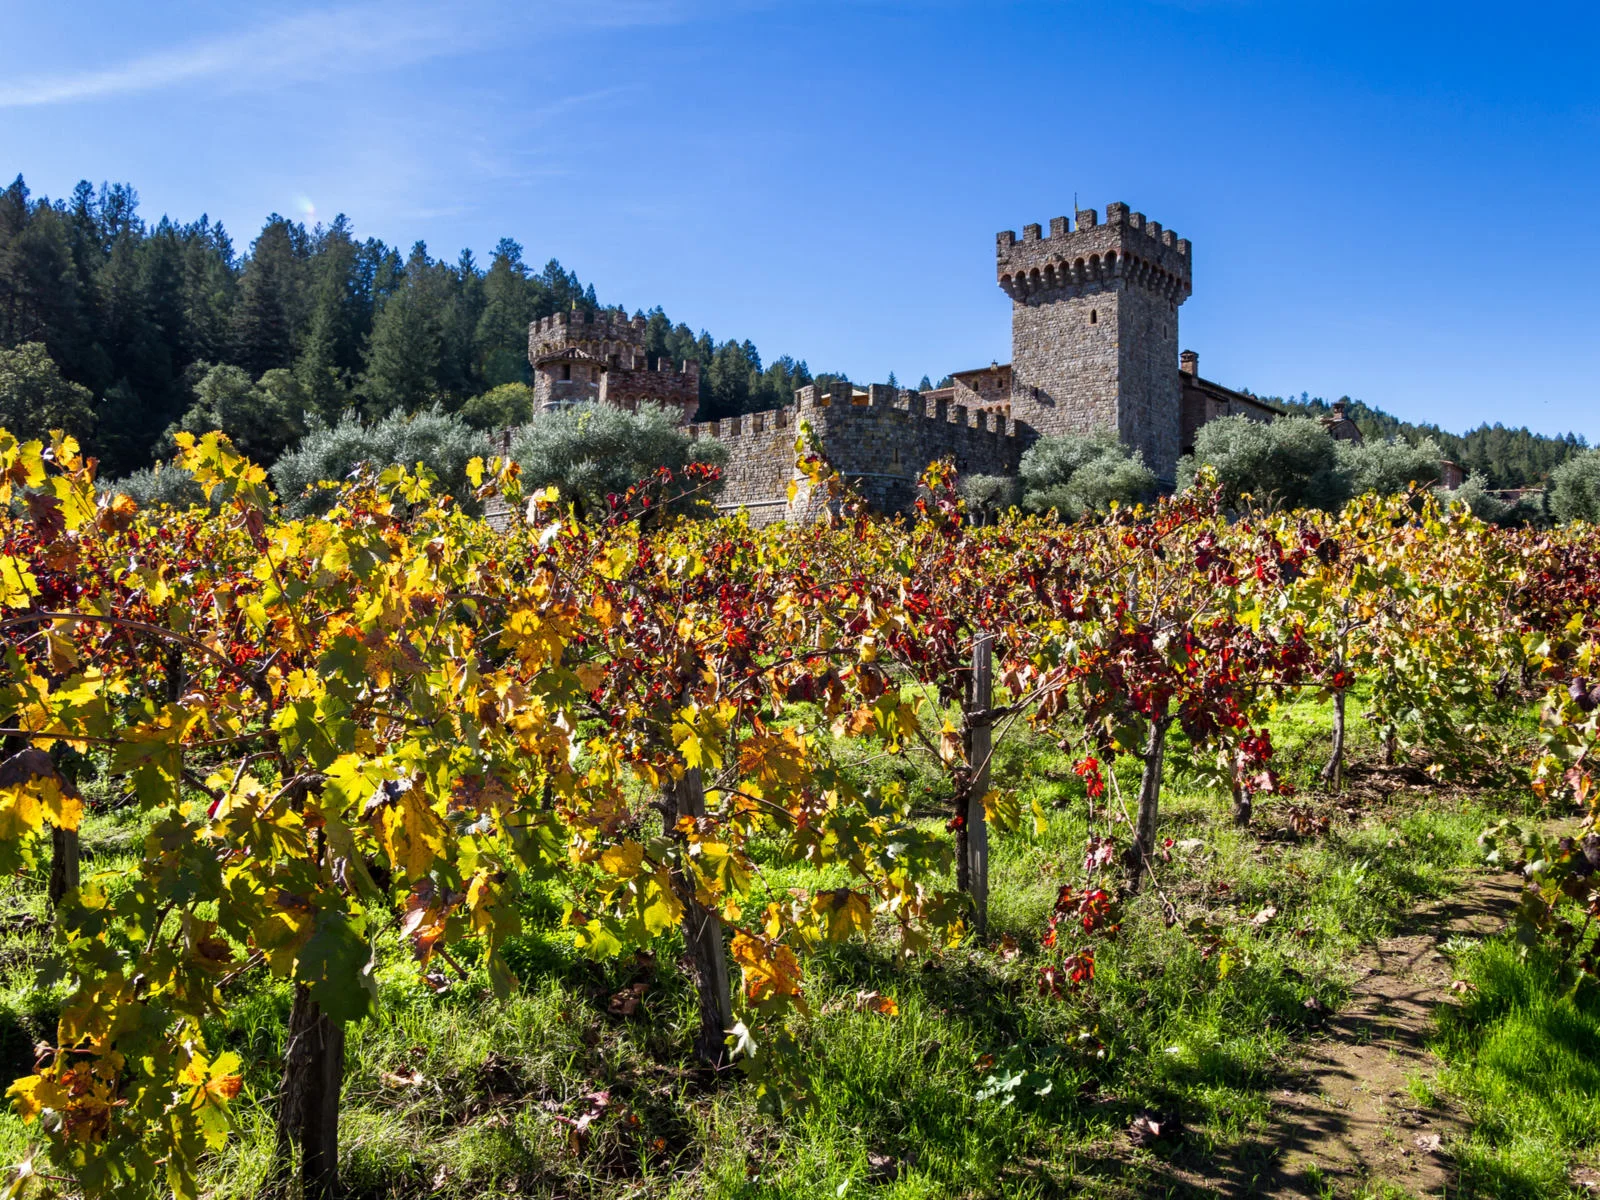 Castello di Amorosa, a tourist castle, pictured during the best time to visit Napa valley with blue sky and blooming grape vines